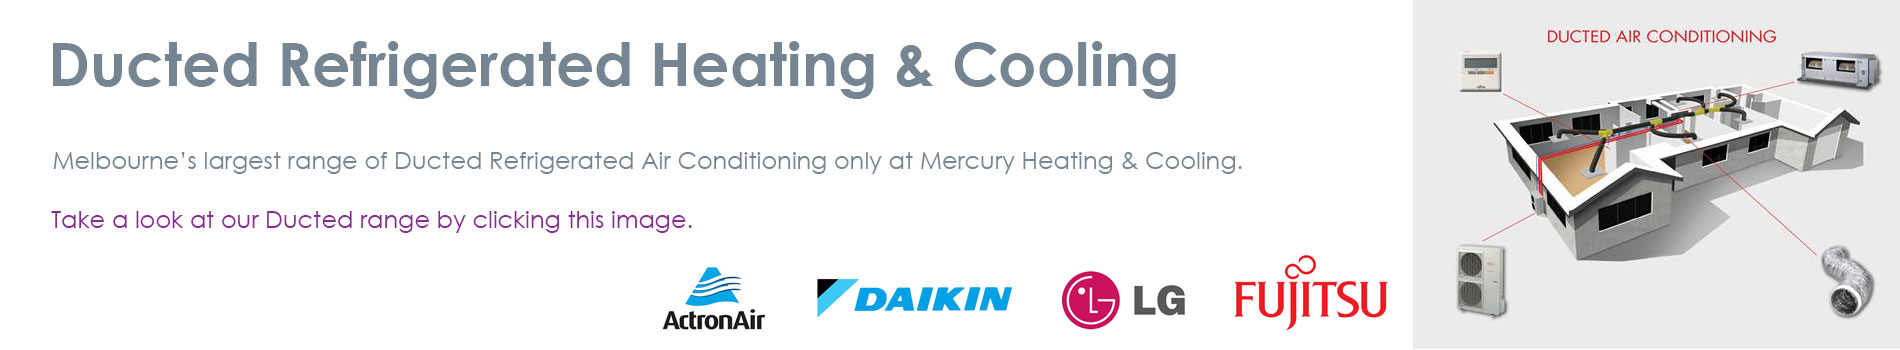 ducted refrigerated air conditioning at mercury heating and cooling melbourne